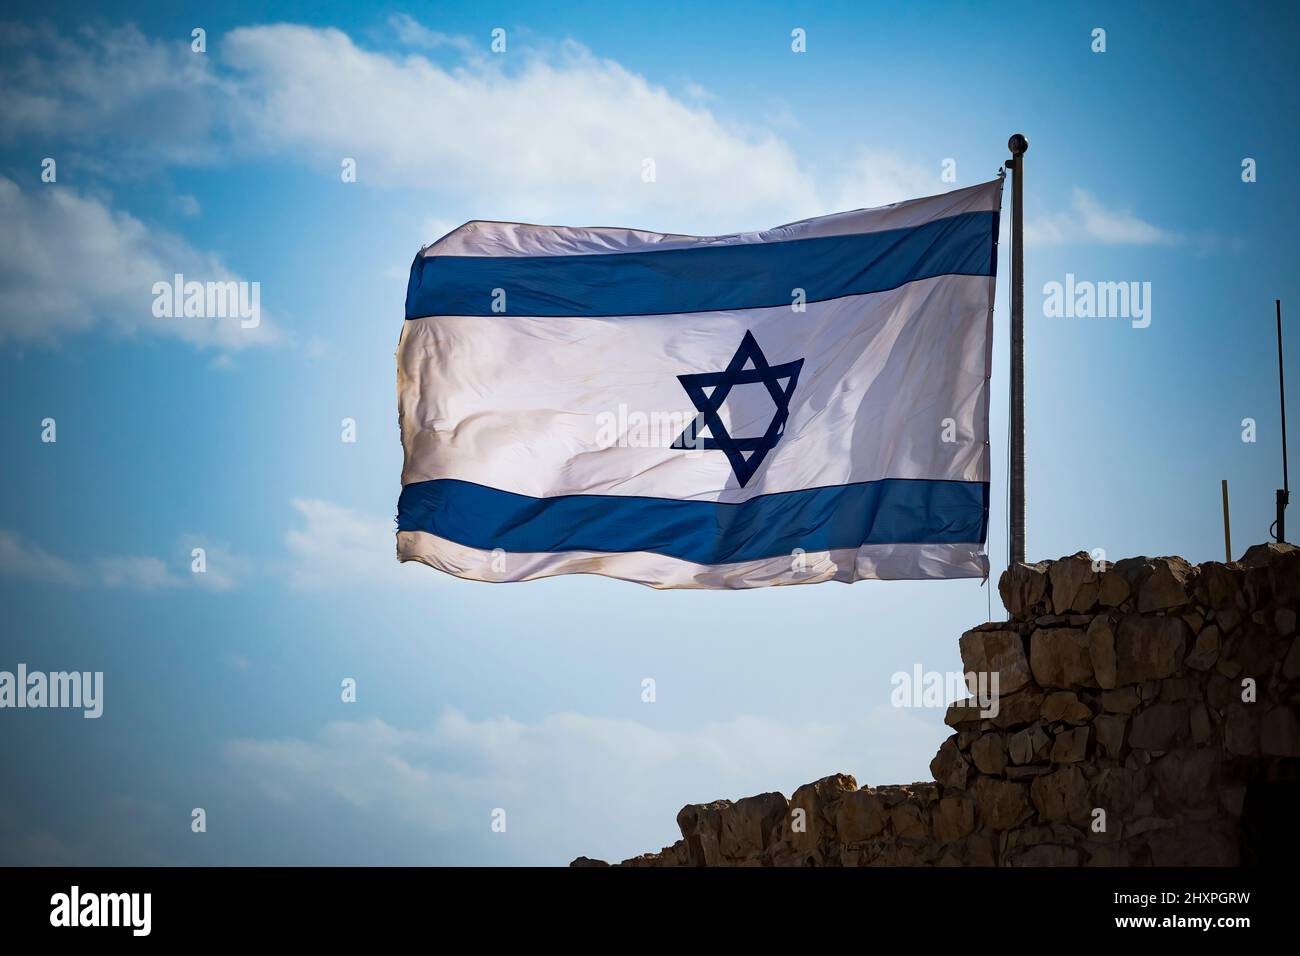 Flag of Israel fluttering in strong wing against cloudy sky Stock Photo